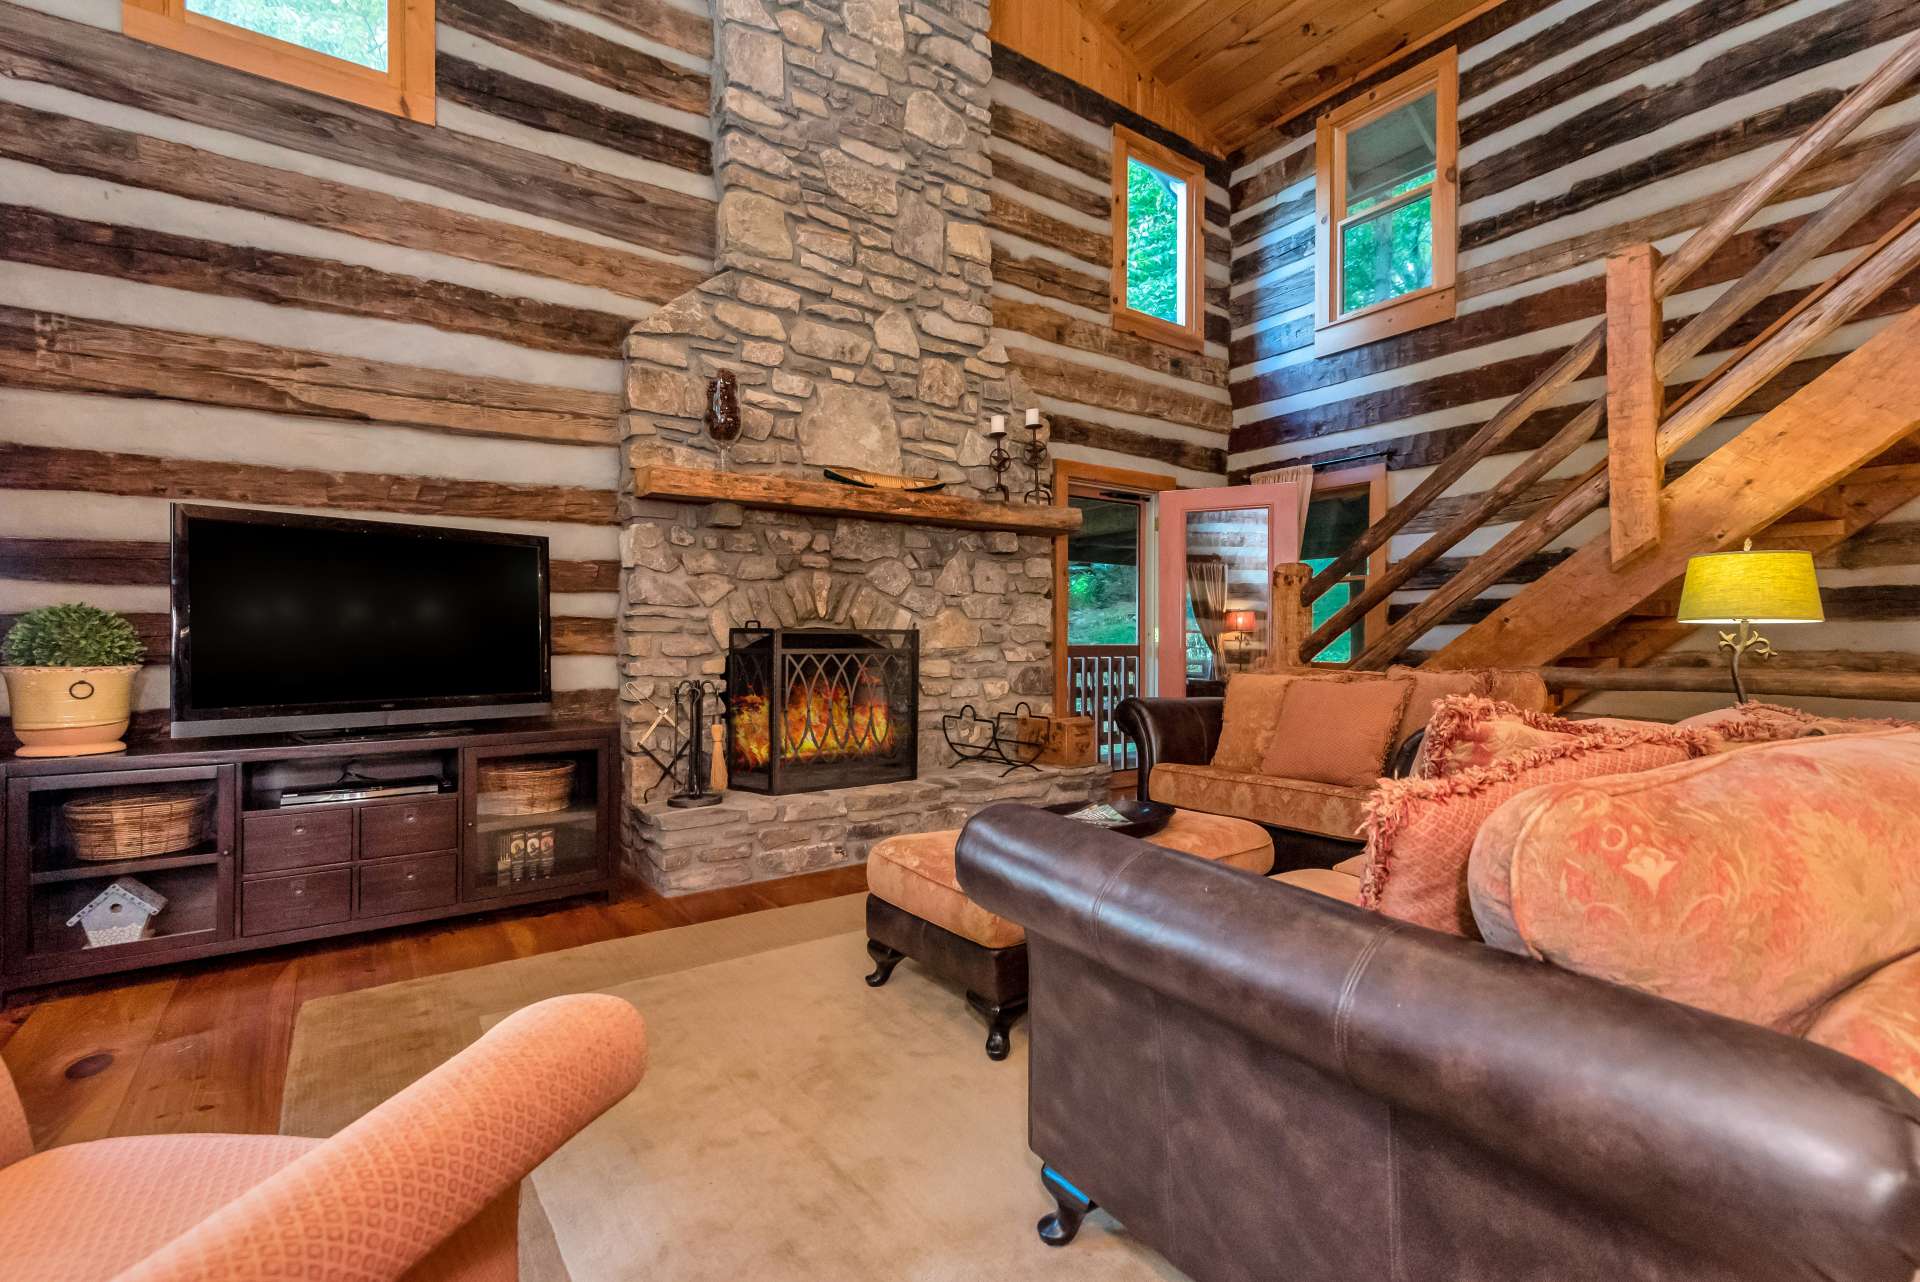 This masterly crafted two story stone fireplace is the center piece of the great room.